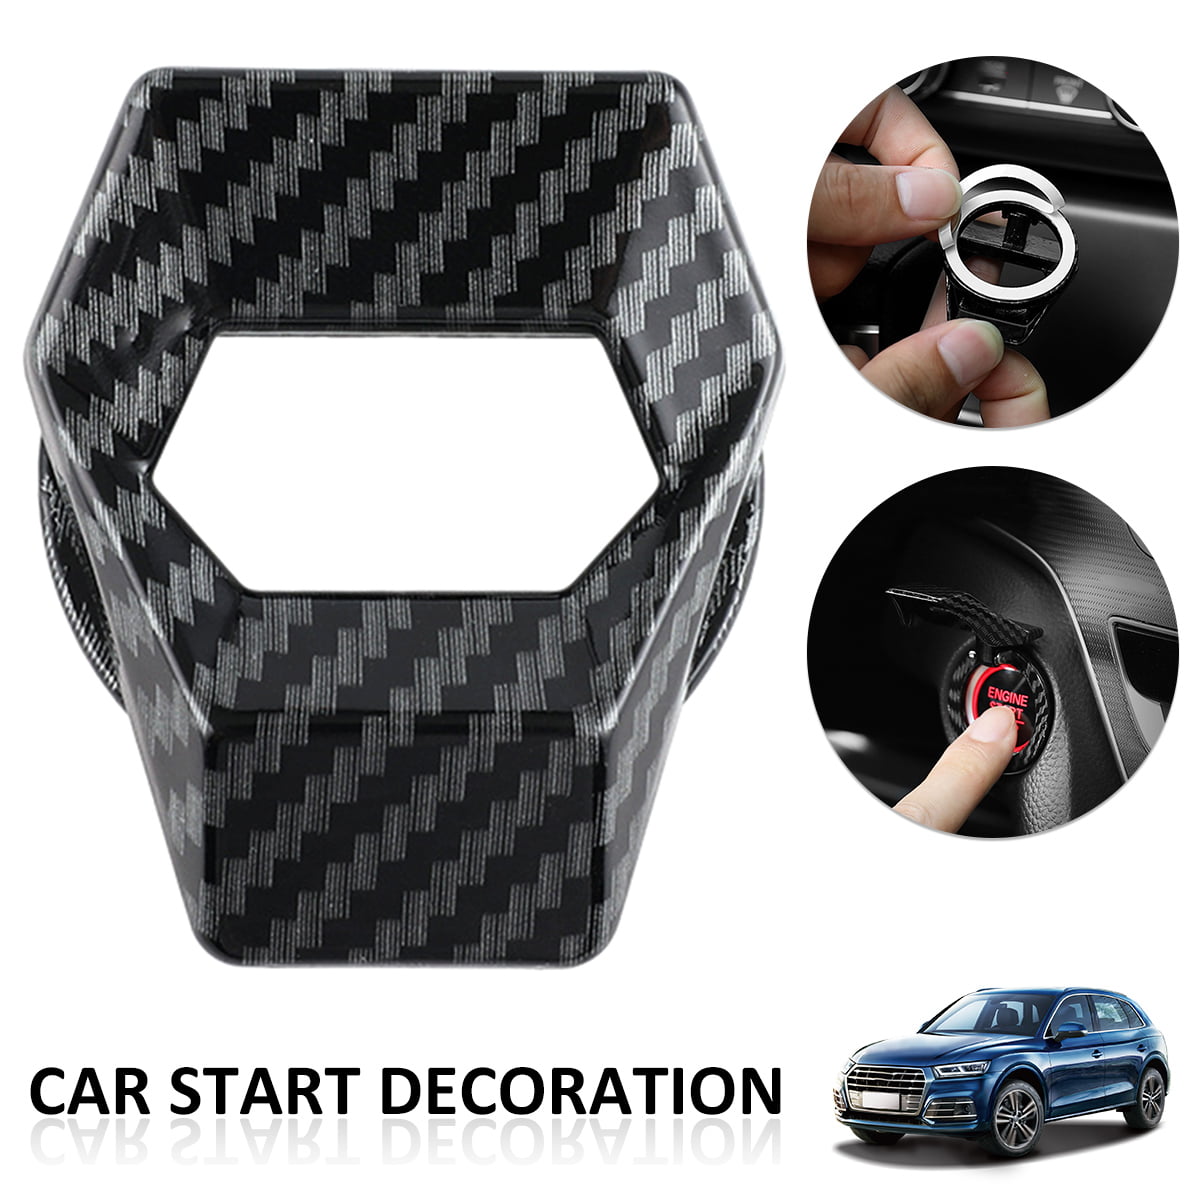 Push to Start Button Ignition Cover Anti-Scratch Universal Aluminum Alloy Button Decoration Cover for Cars Blue Engine Start/Stop Button Cover 